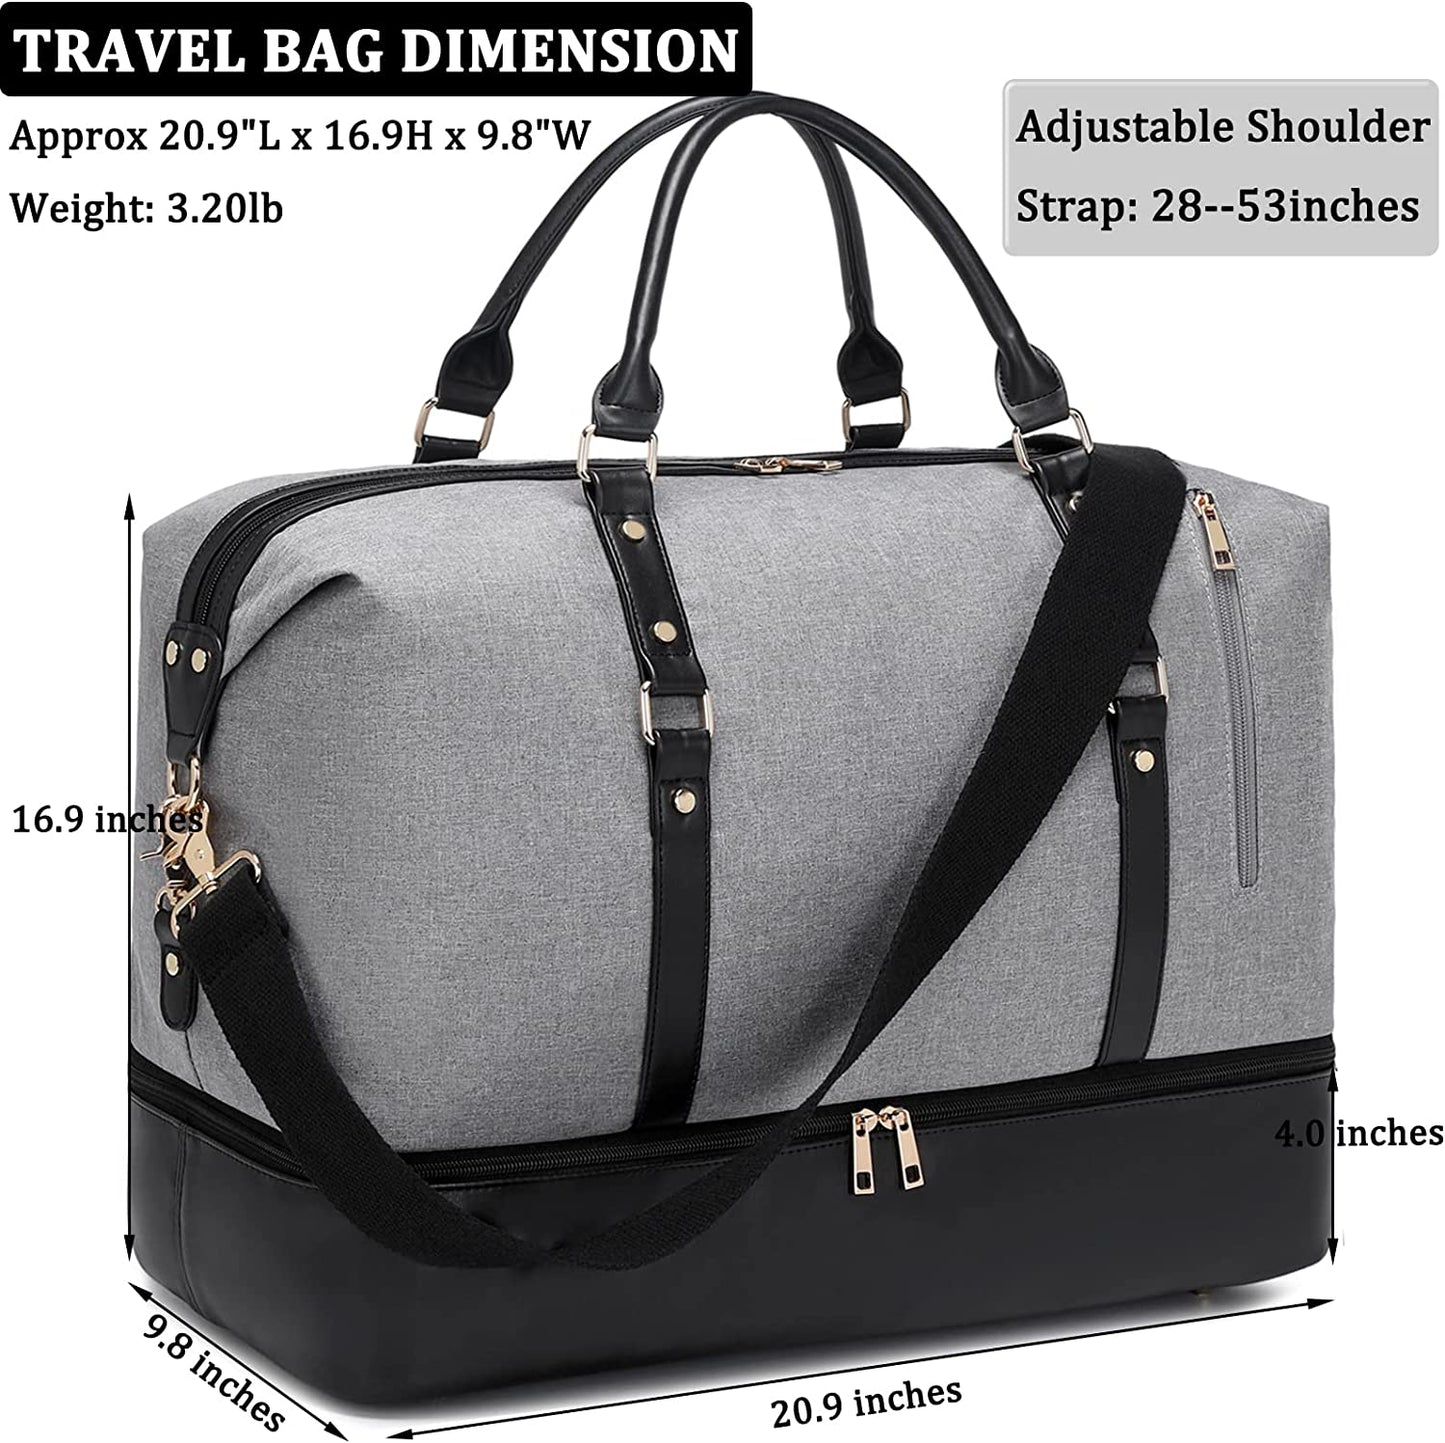 Weekender Bags for Women Oversized Travel Bag Womens Overnight Bag Mens Duffle Bag Large Size with Shoe Compartment